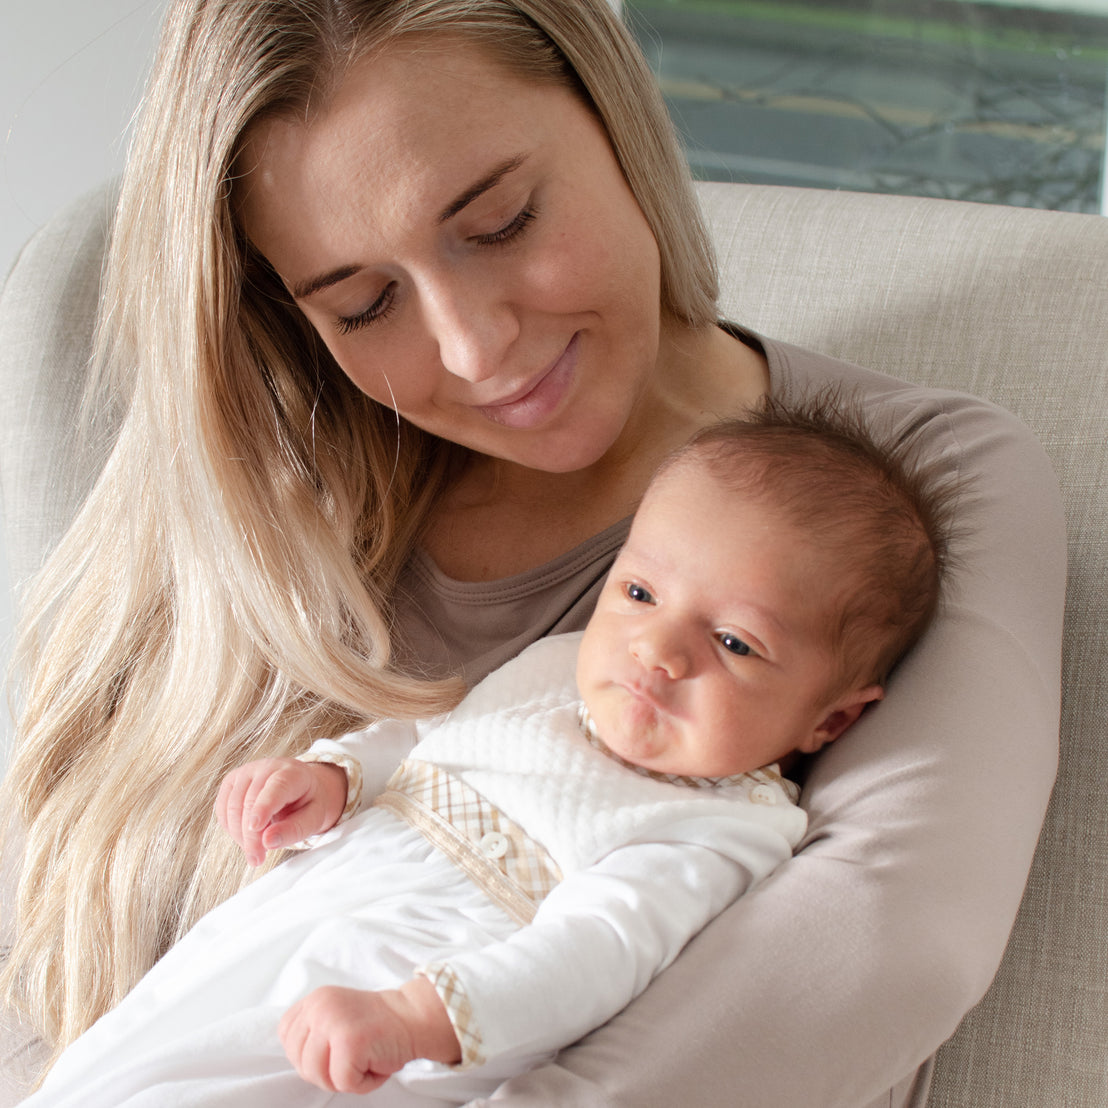 A tender moment between a woman and a newborn baby. The woman, smiling gently, cradles the wide-eyed baby in her arms while sitting in a cozy chair. The newborn is snug in a Dylan Layette.